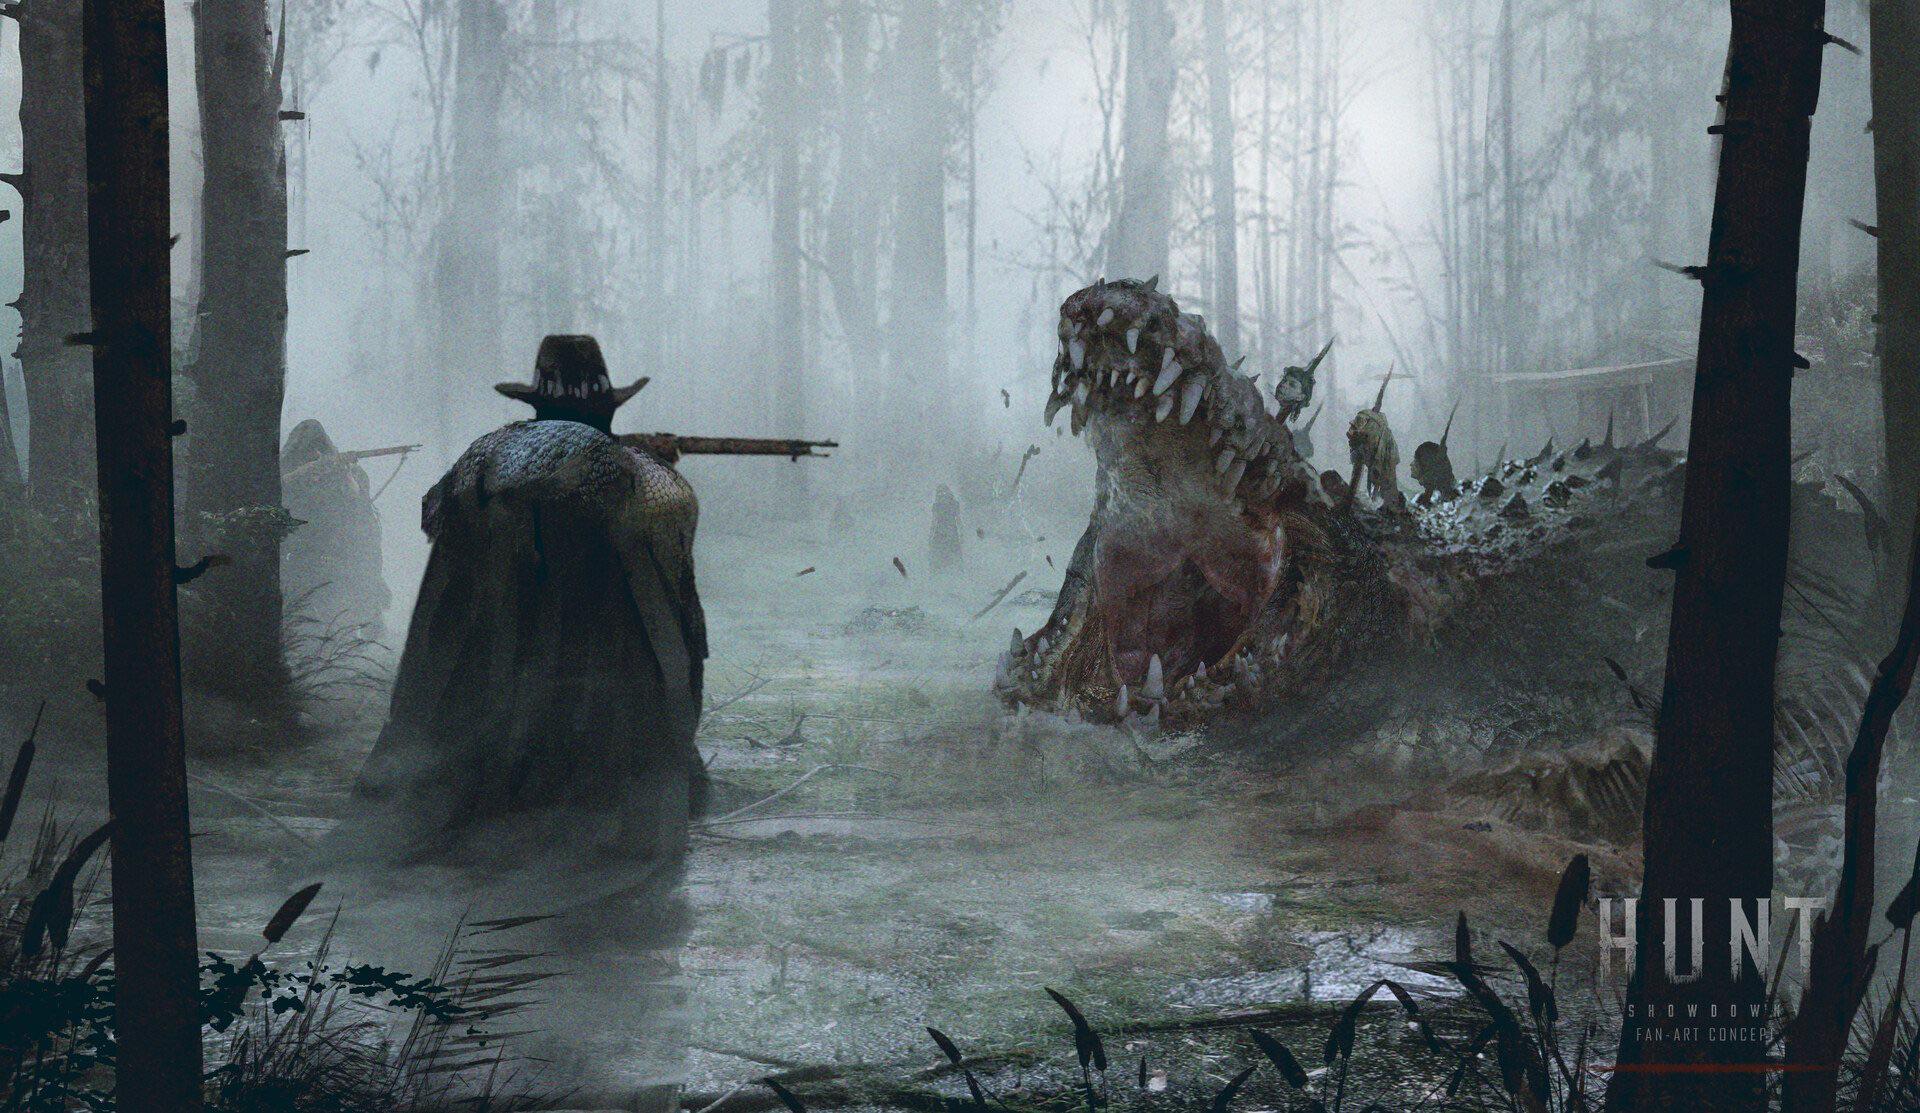  Hunt: Showdown Hintergrundbild 1920x1113. This shows up when looking up hunt showdown wallpaper. Now I really want it as a boss monster. We have swamp and water areas already! Crytek pls